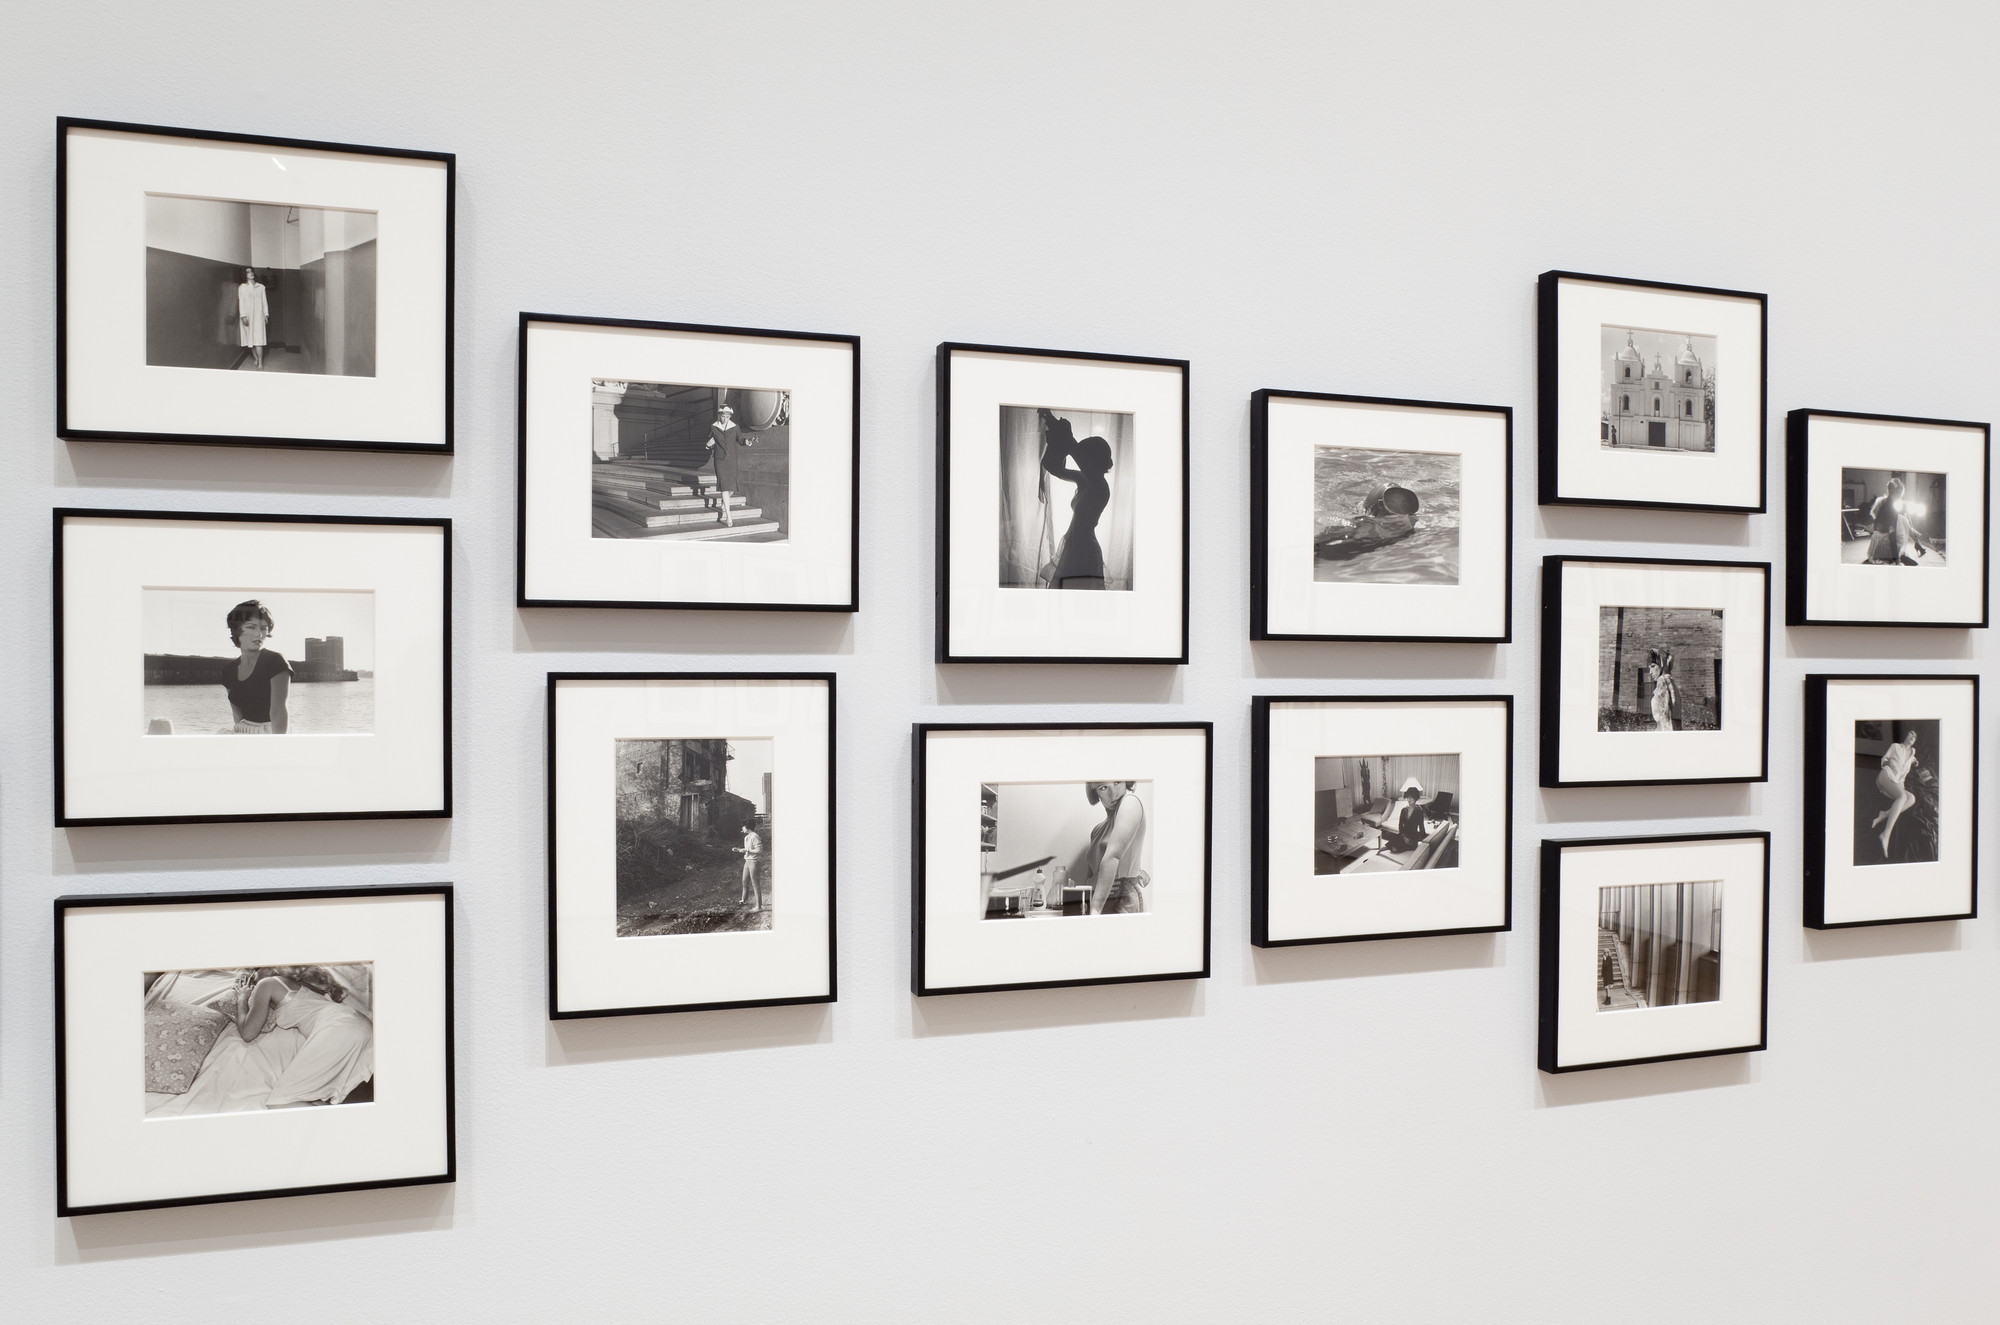 Pictures of You: Cindy Sherman at the Museum of Modern Art